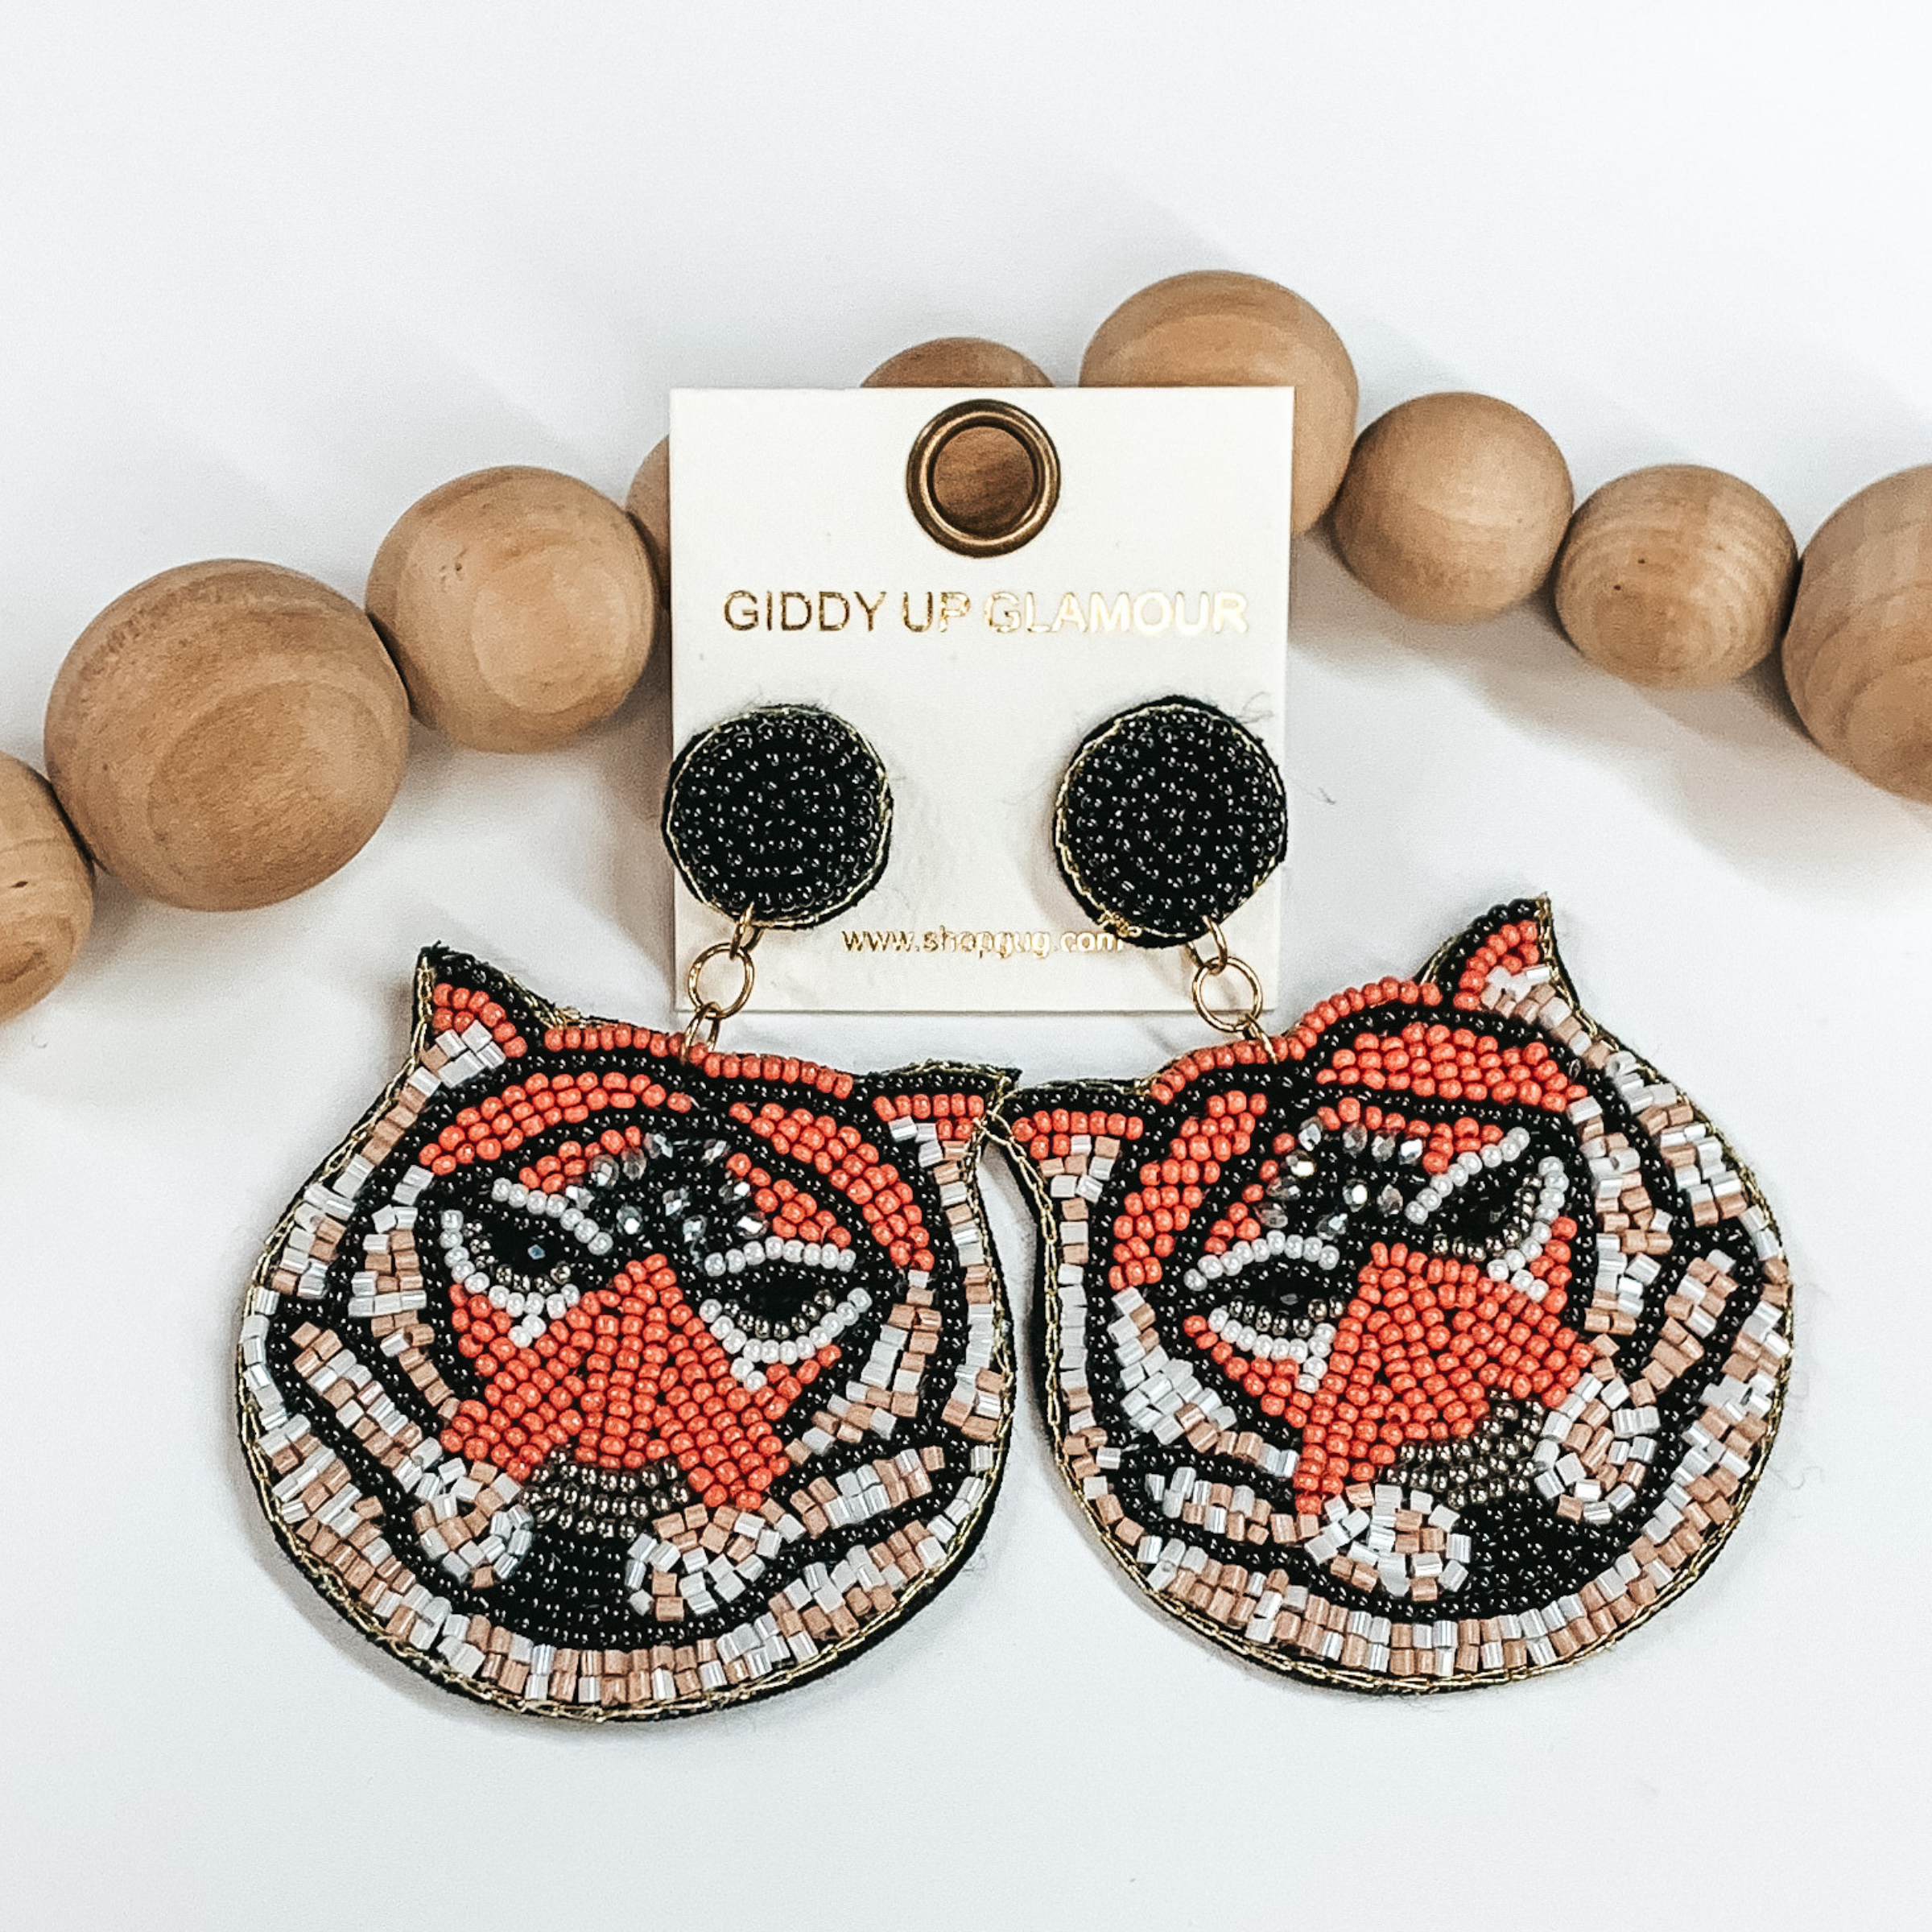 Tiger beaded drop earrings with black, orange, white,  peach, silver beads and silver crystals. Outlined in gold thread. Taken in a white background with  brown beads as decor.